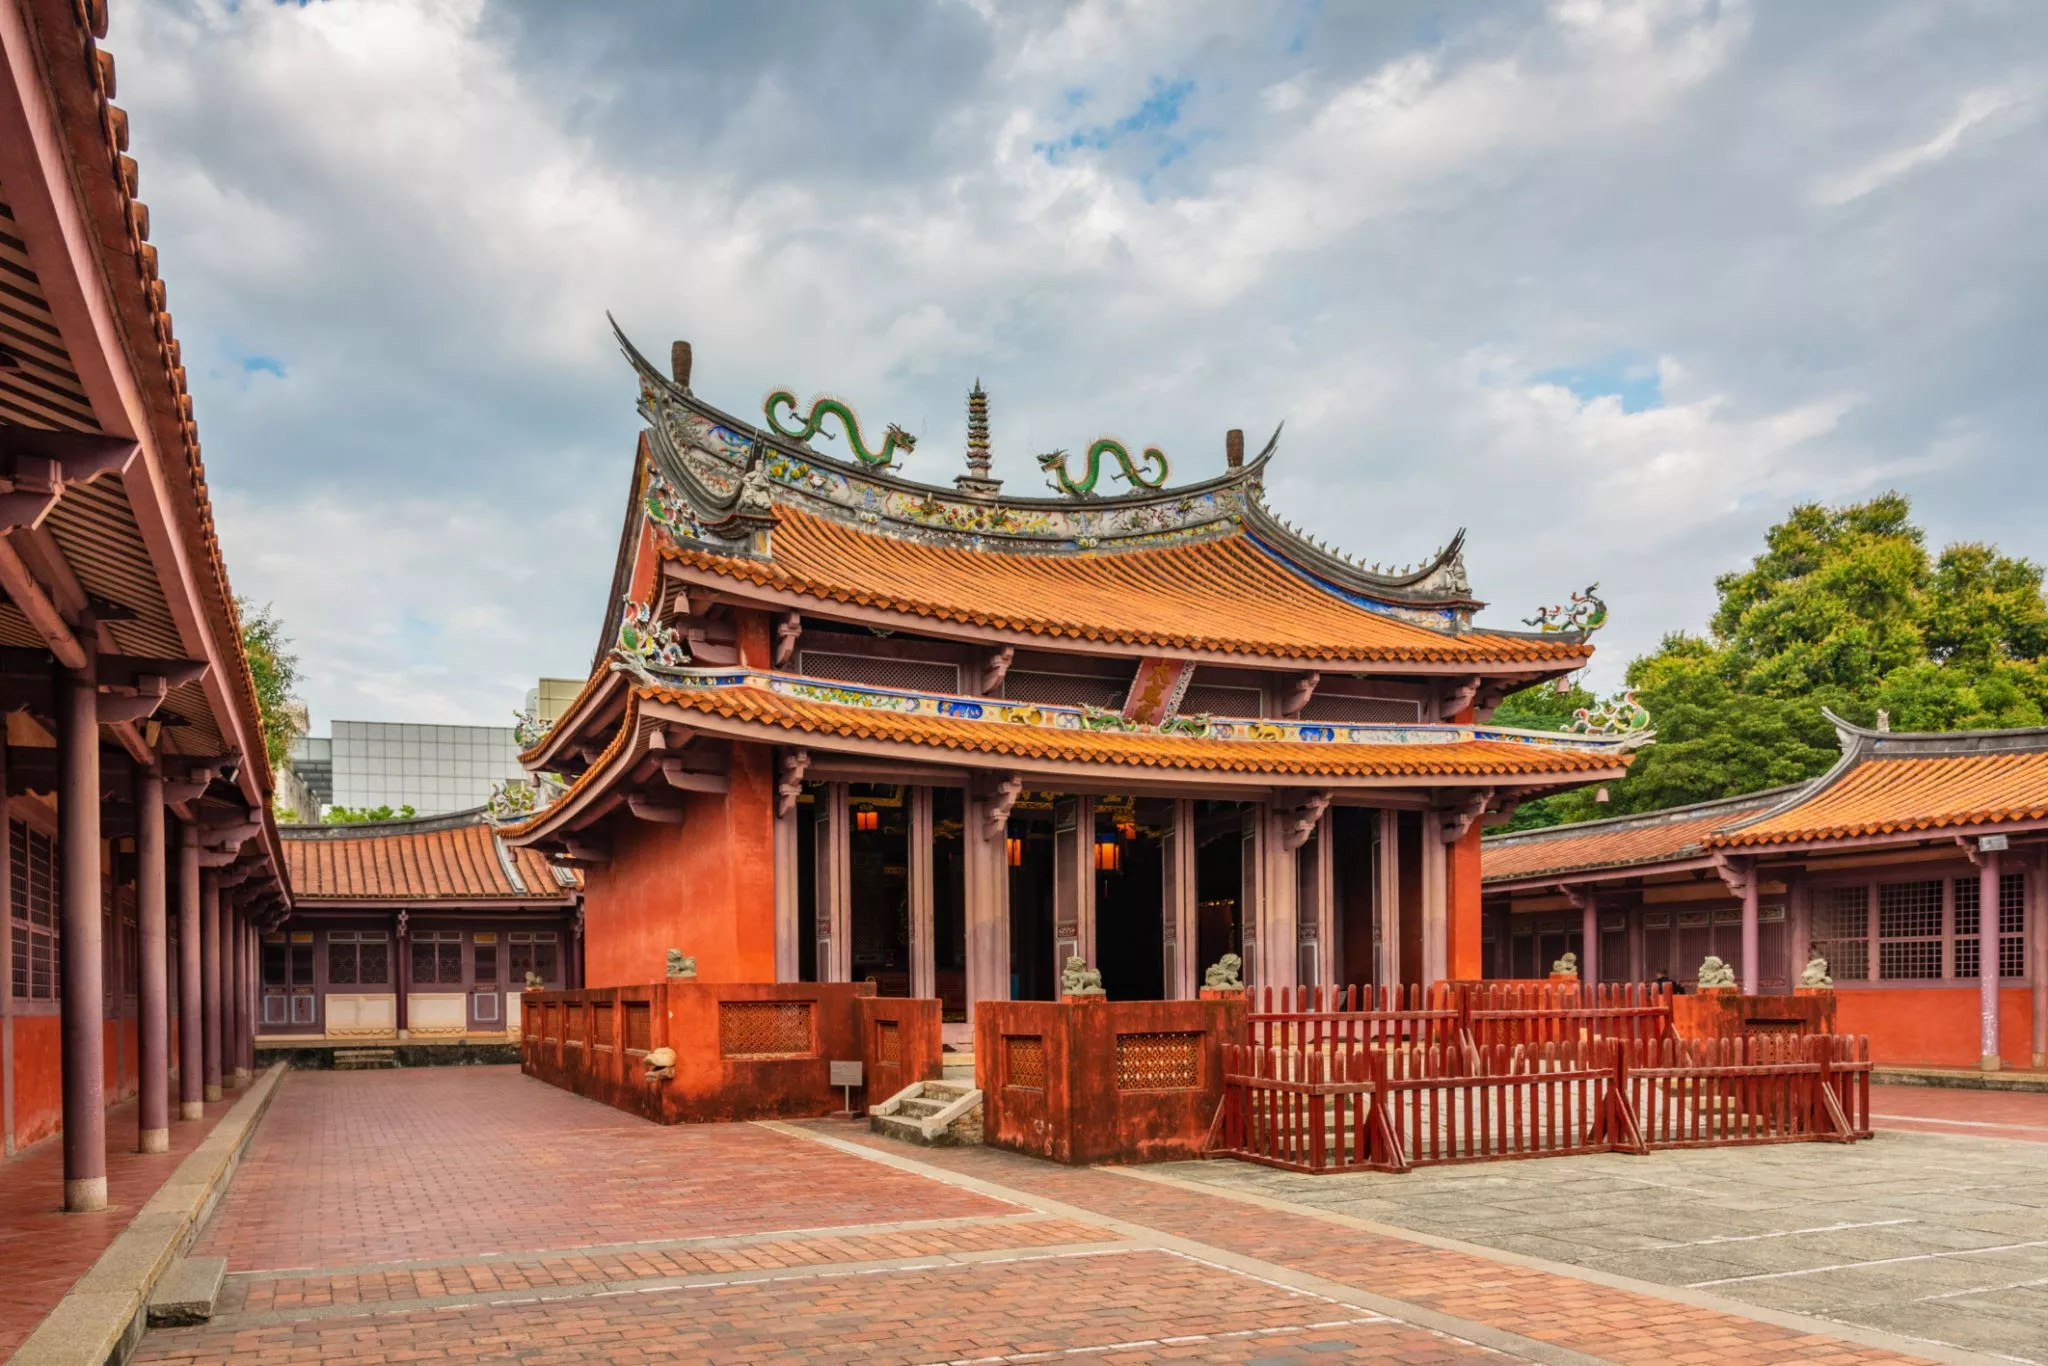 Confucius Temple in Taiwan, East Asia | Architecture - Rated 3.6